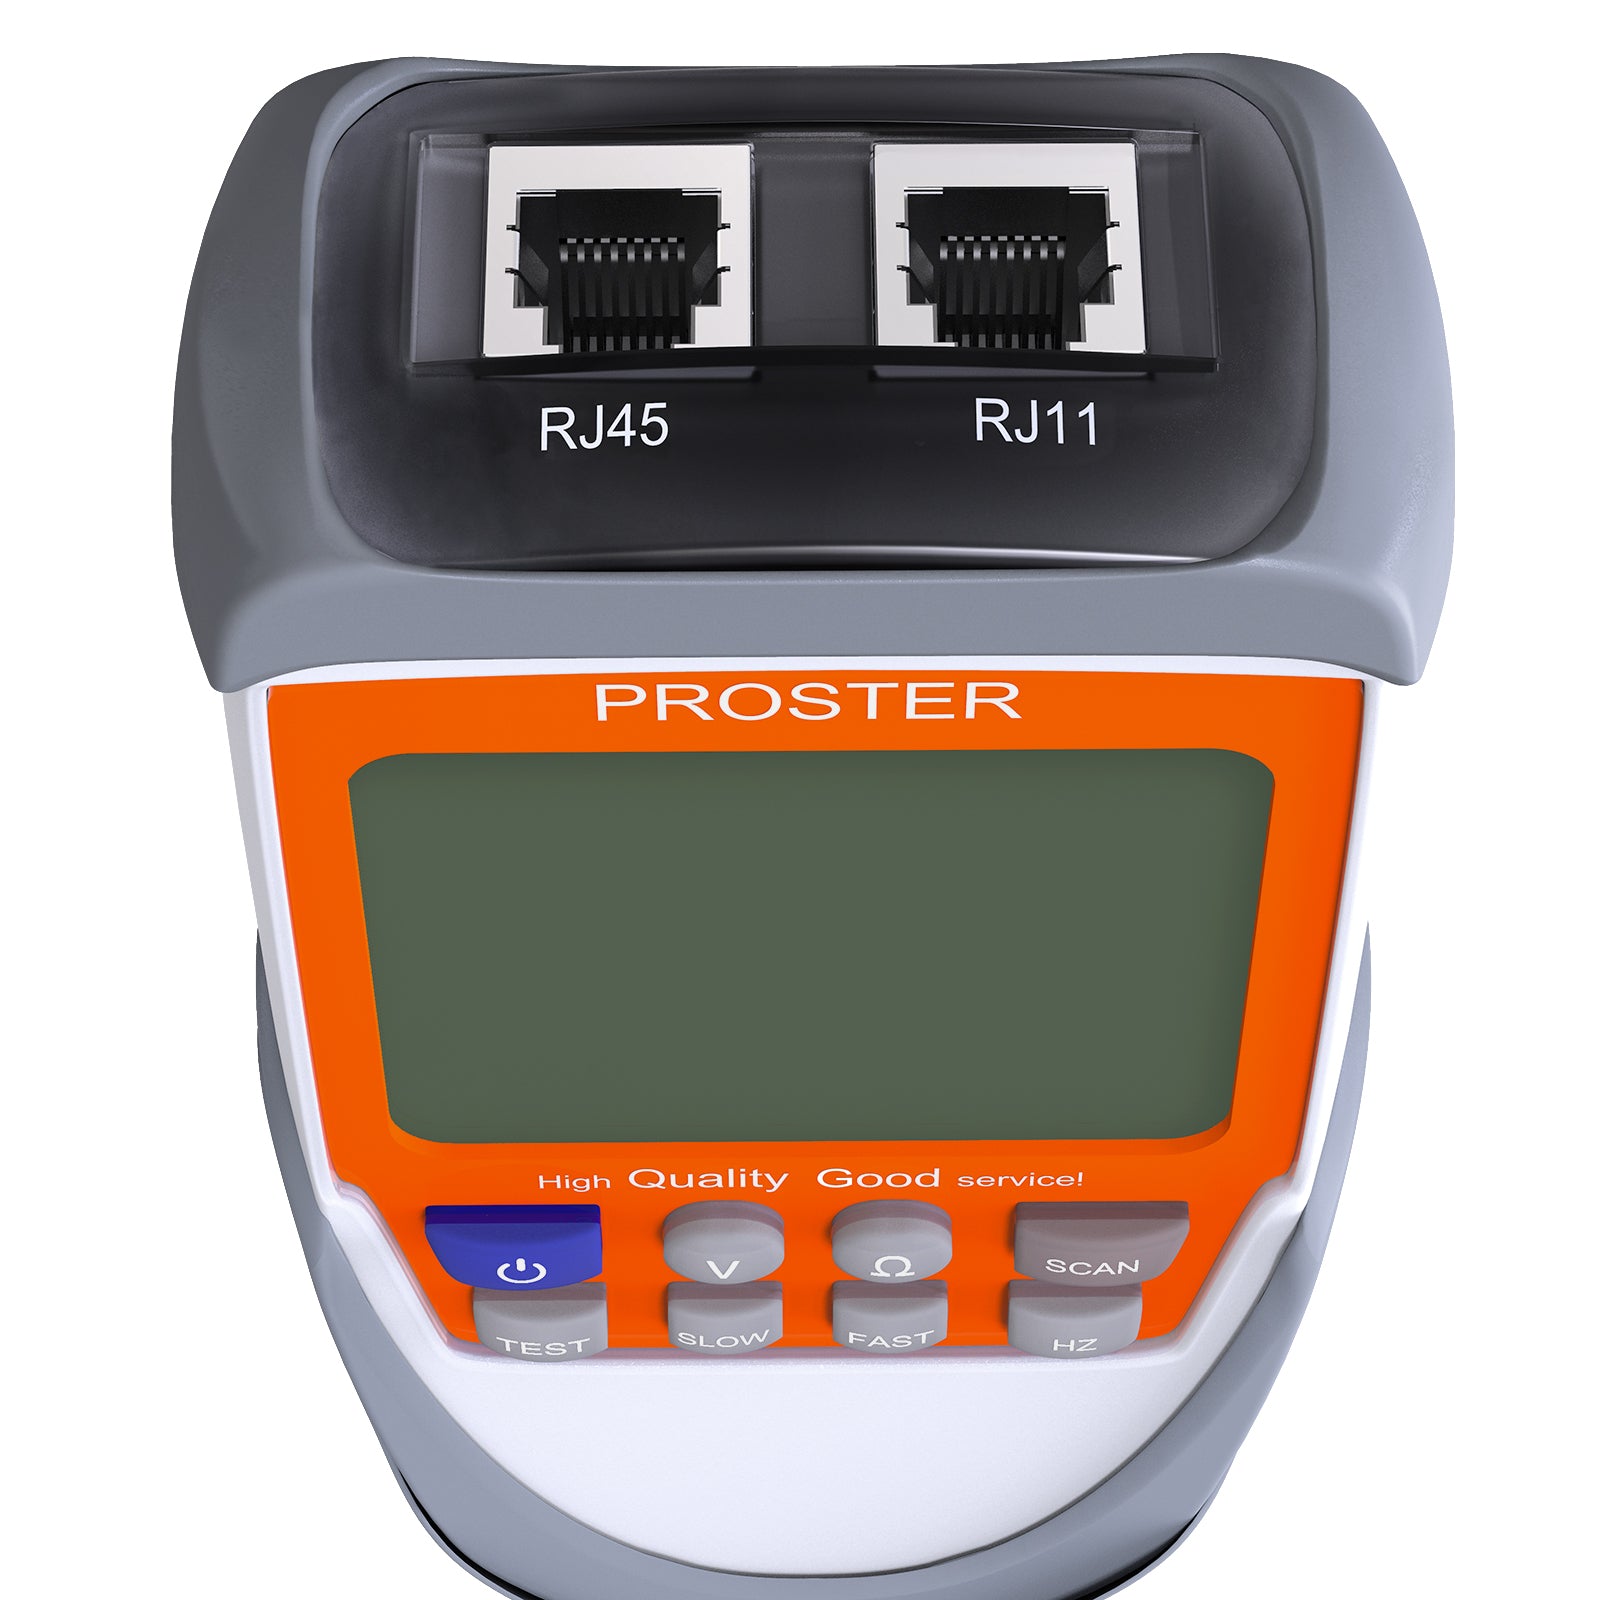 Proster Network Cable Tester LCD with POE Function Ethernet